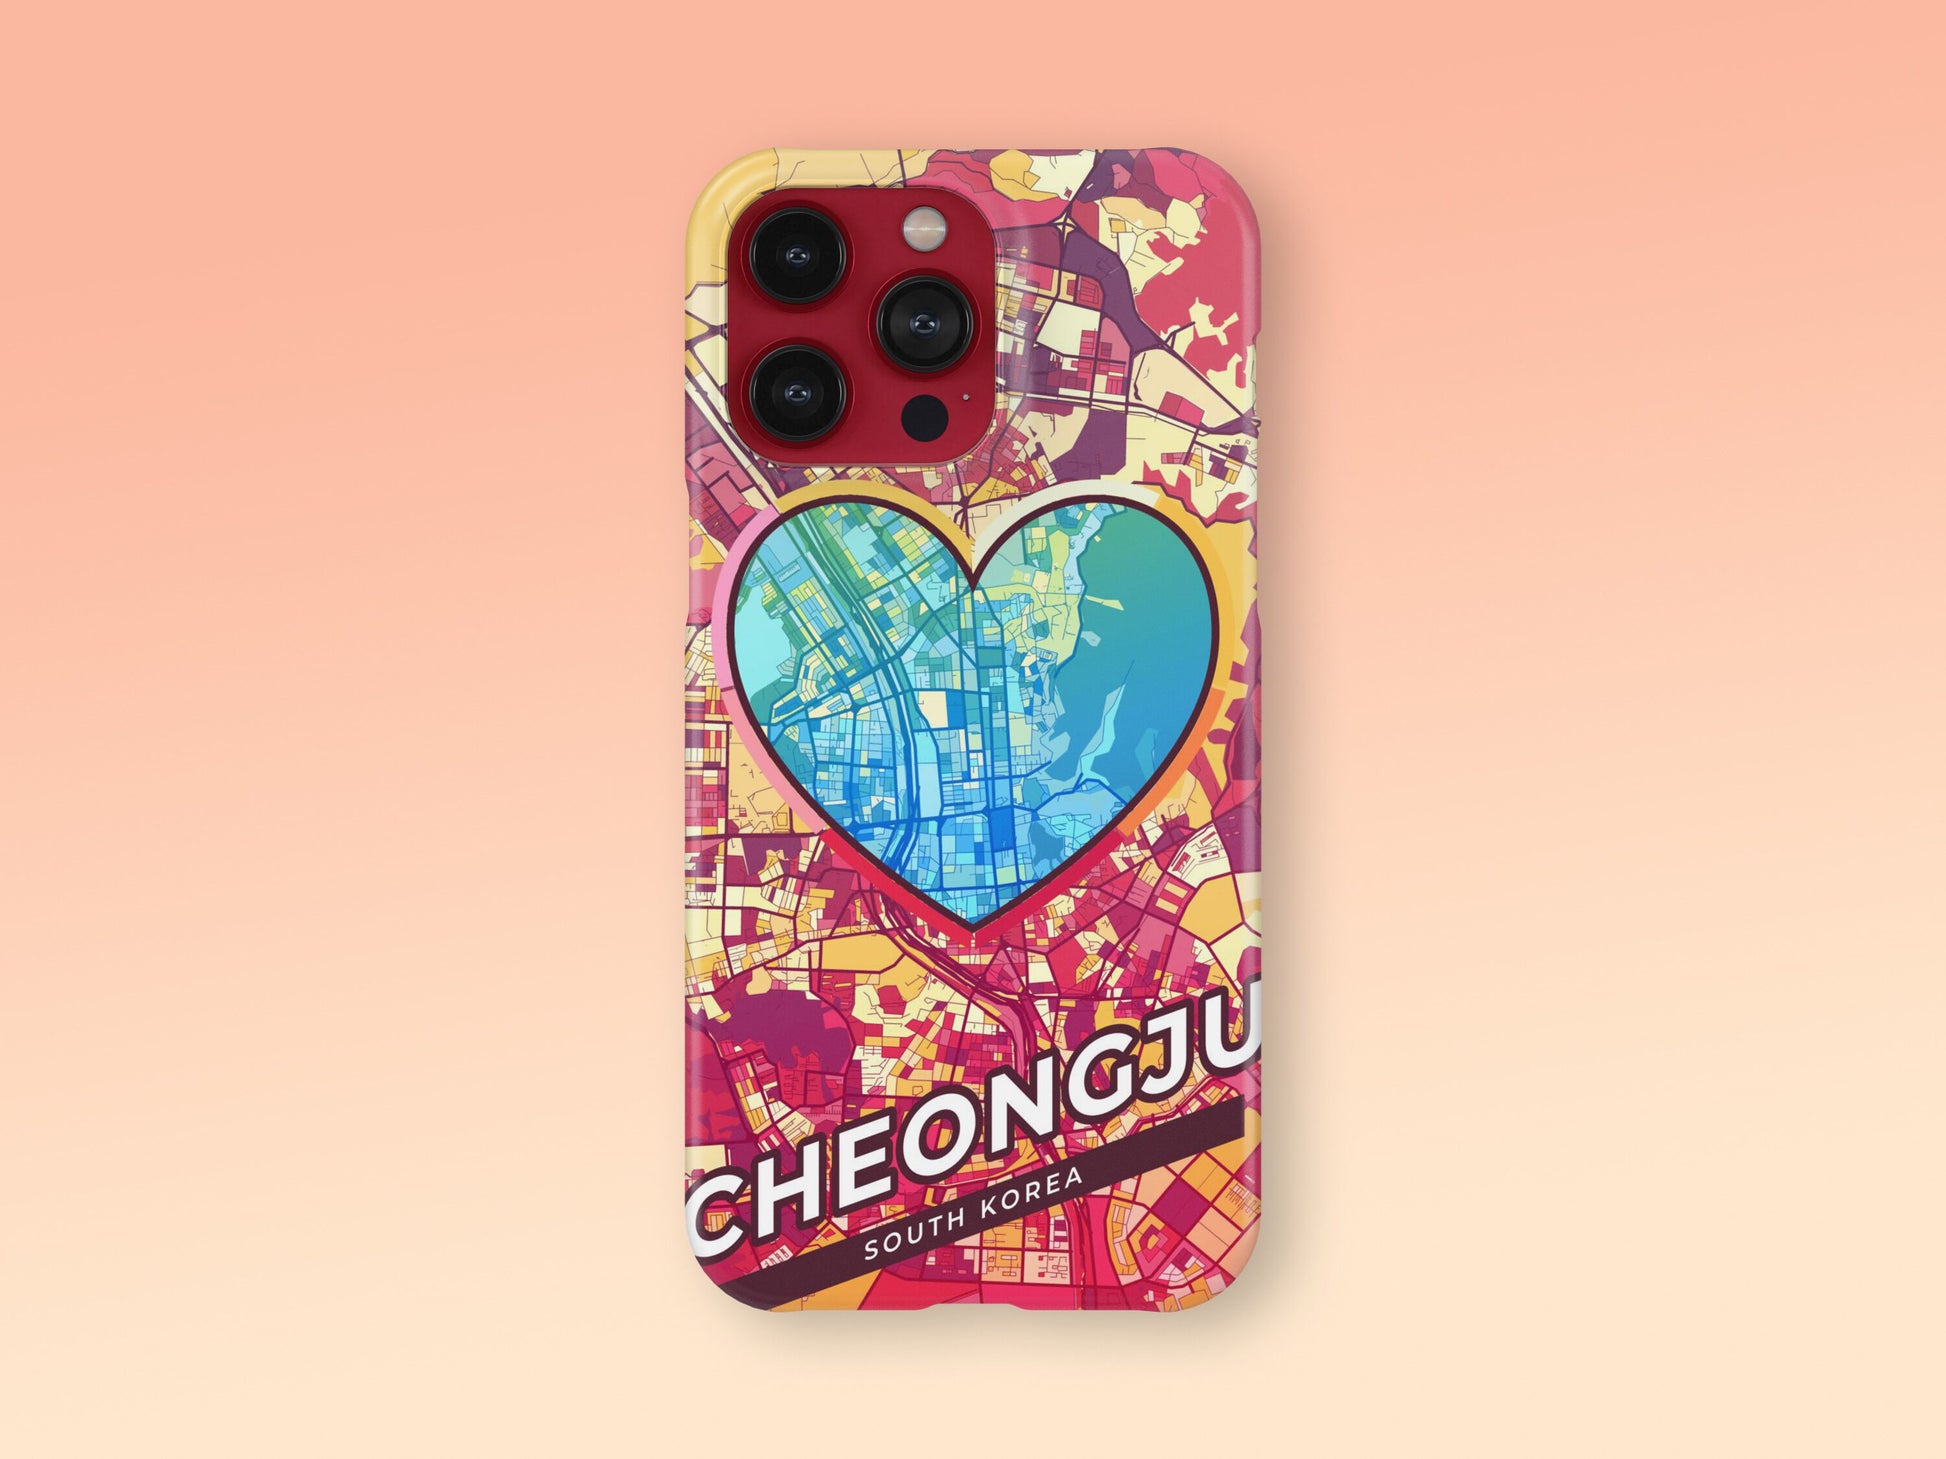 Cheongju South Korea slim phone case with colorful icon. Birthday, wedding or housewarming gift. Couple match cases. 2